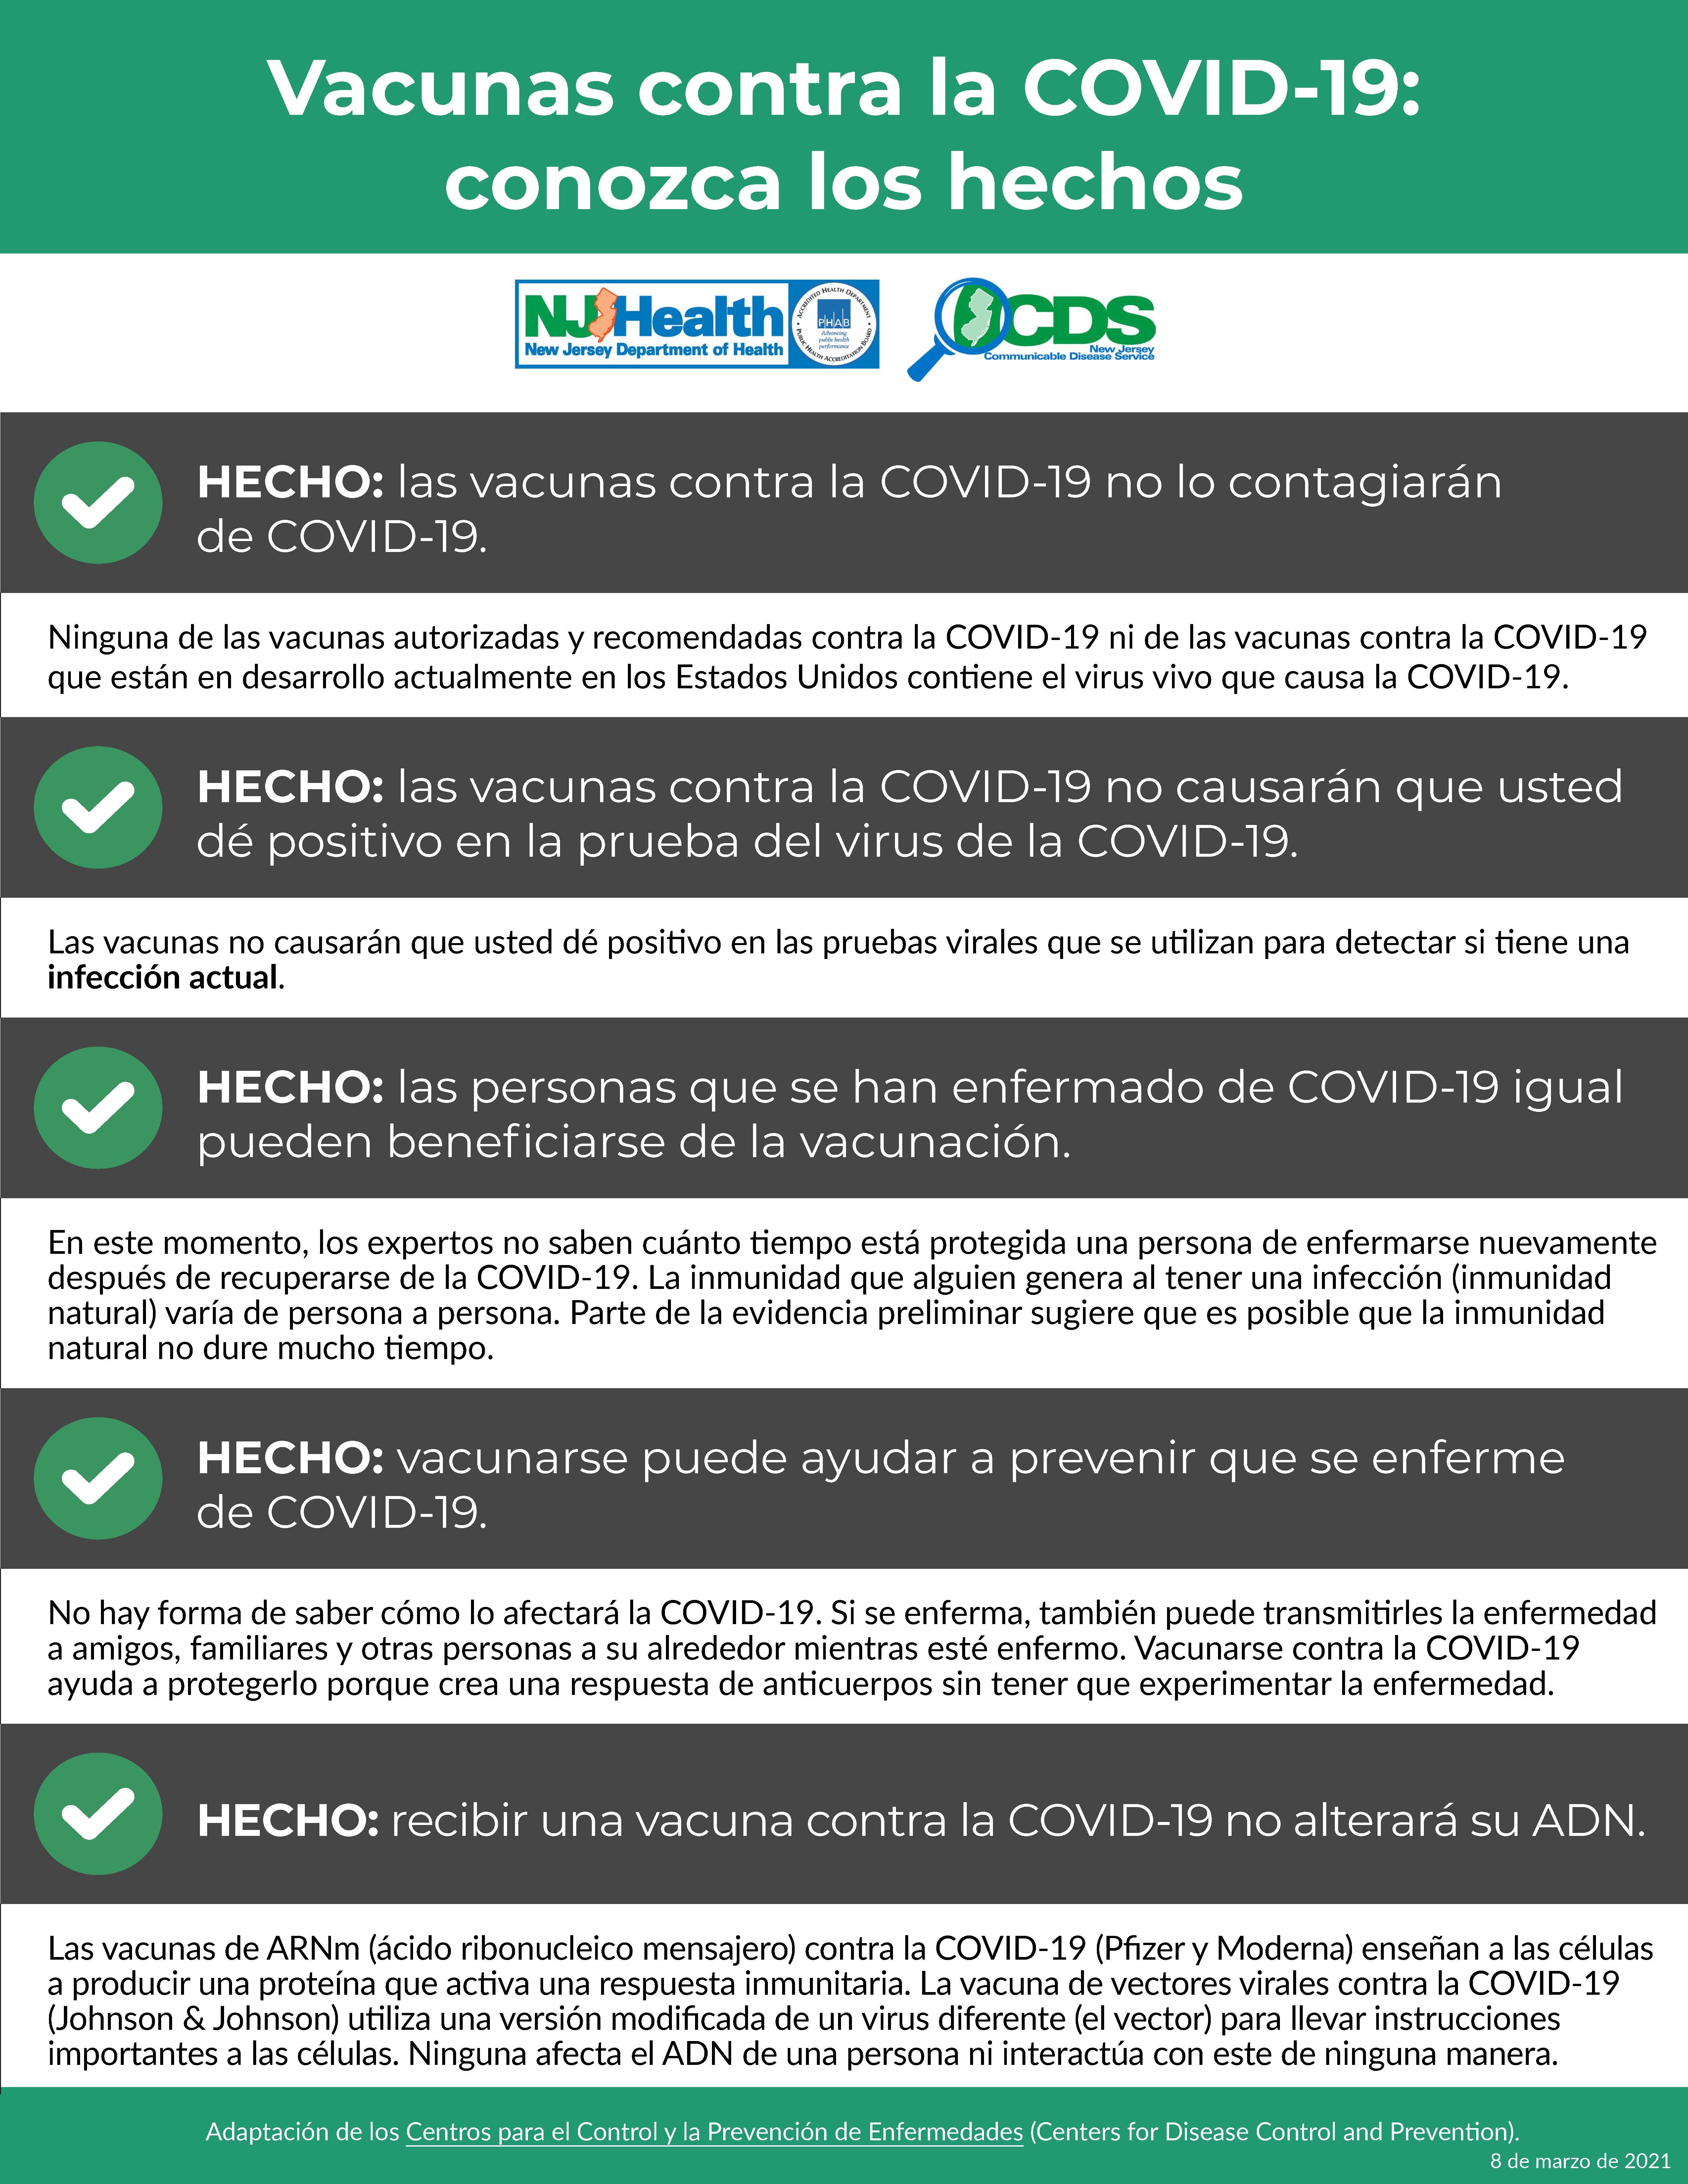 COVID-19 Vaccine Know the Facts flyer (Spanish)